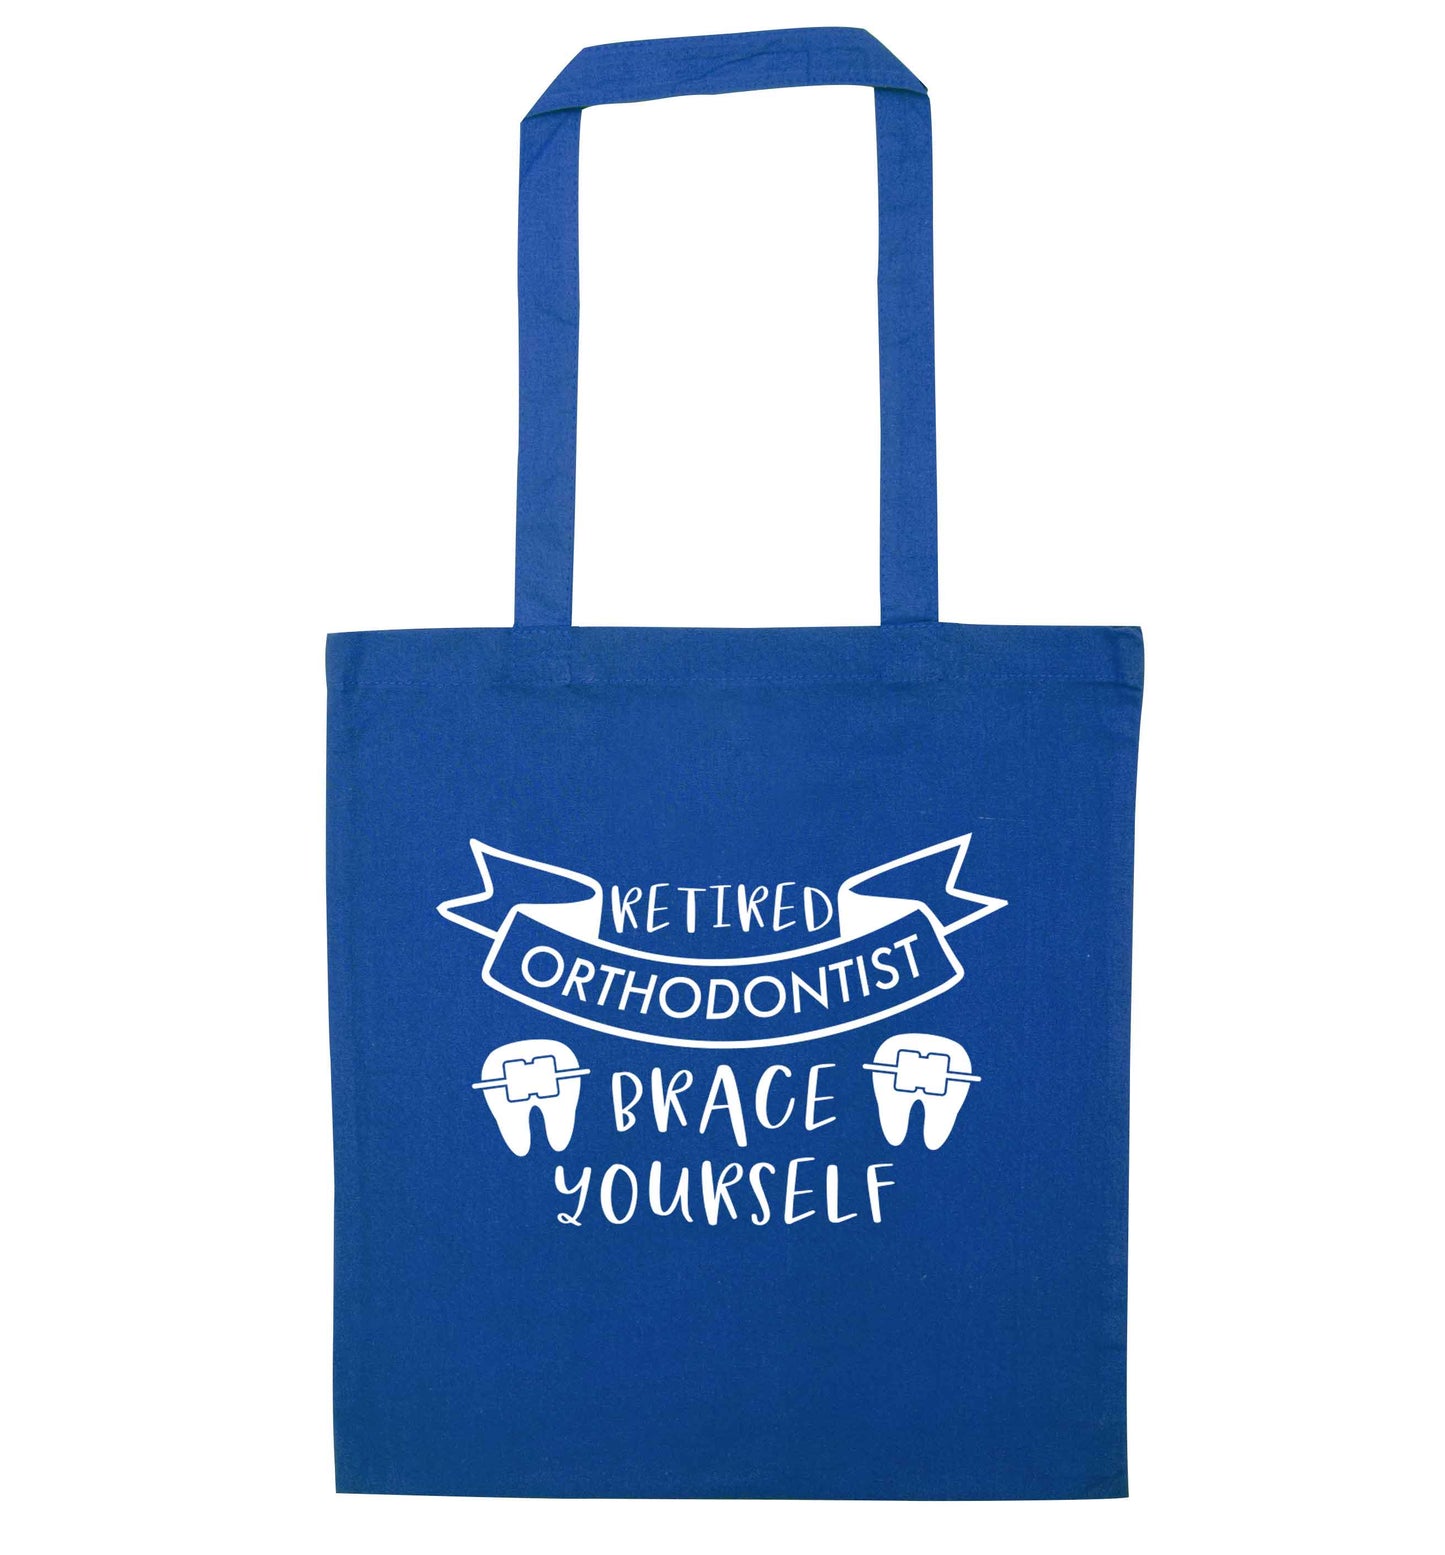 Retired orthodontist brace yourself blue tote bag